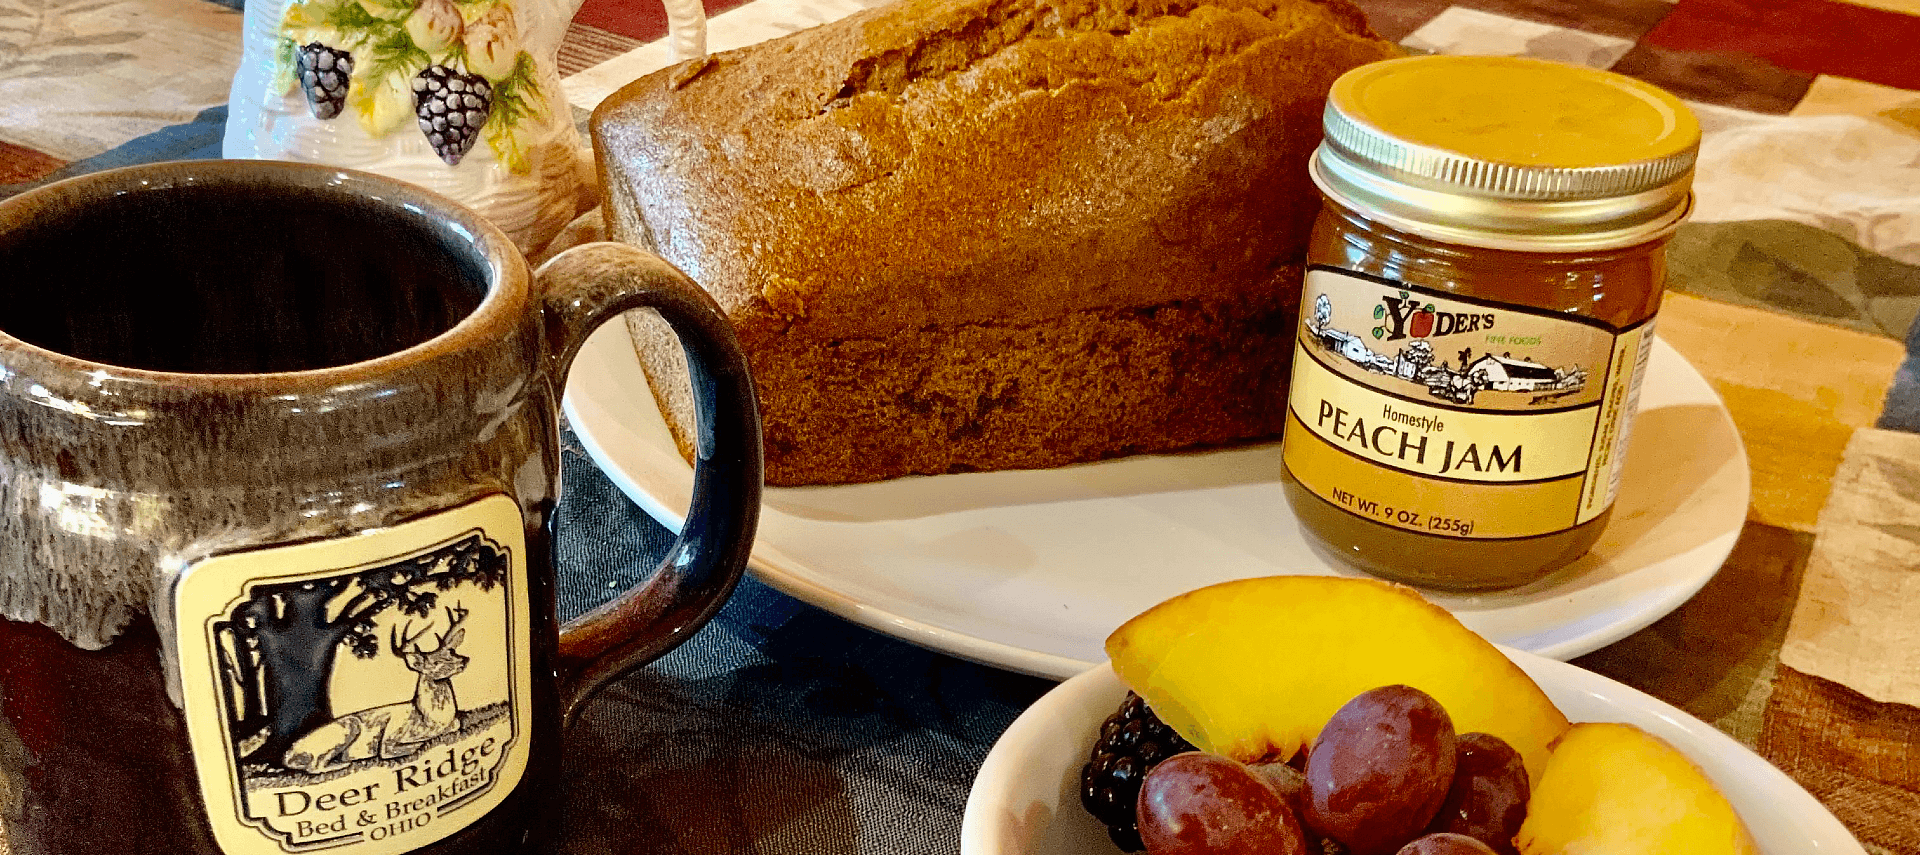 Plate with a loaf of bread and jam, bowl of mixed fruit and ceramic coffee mug